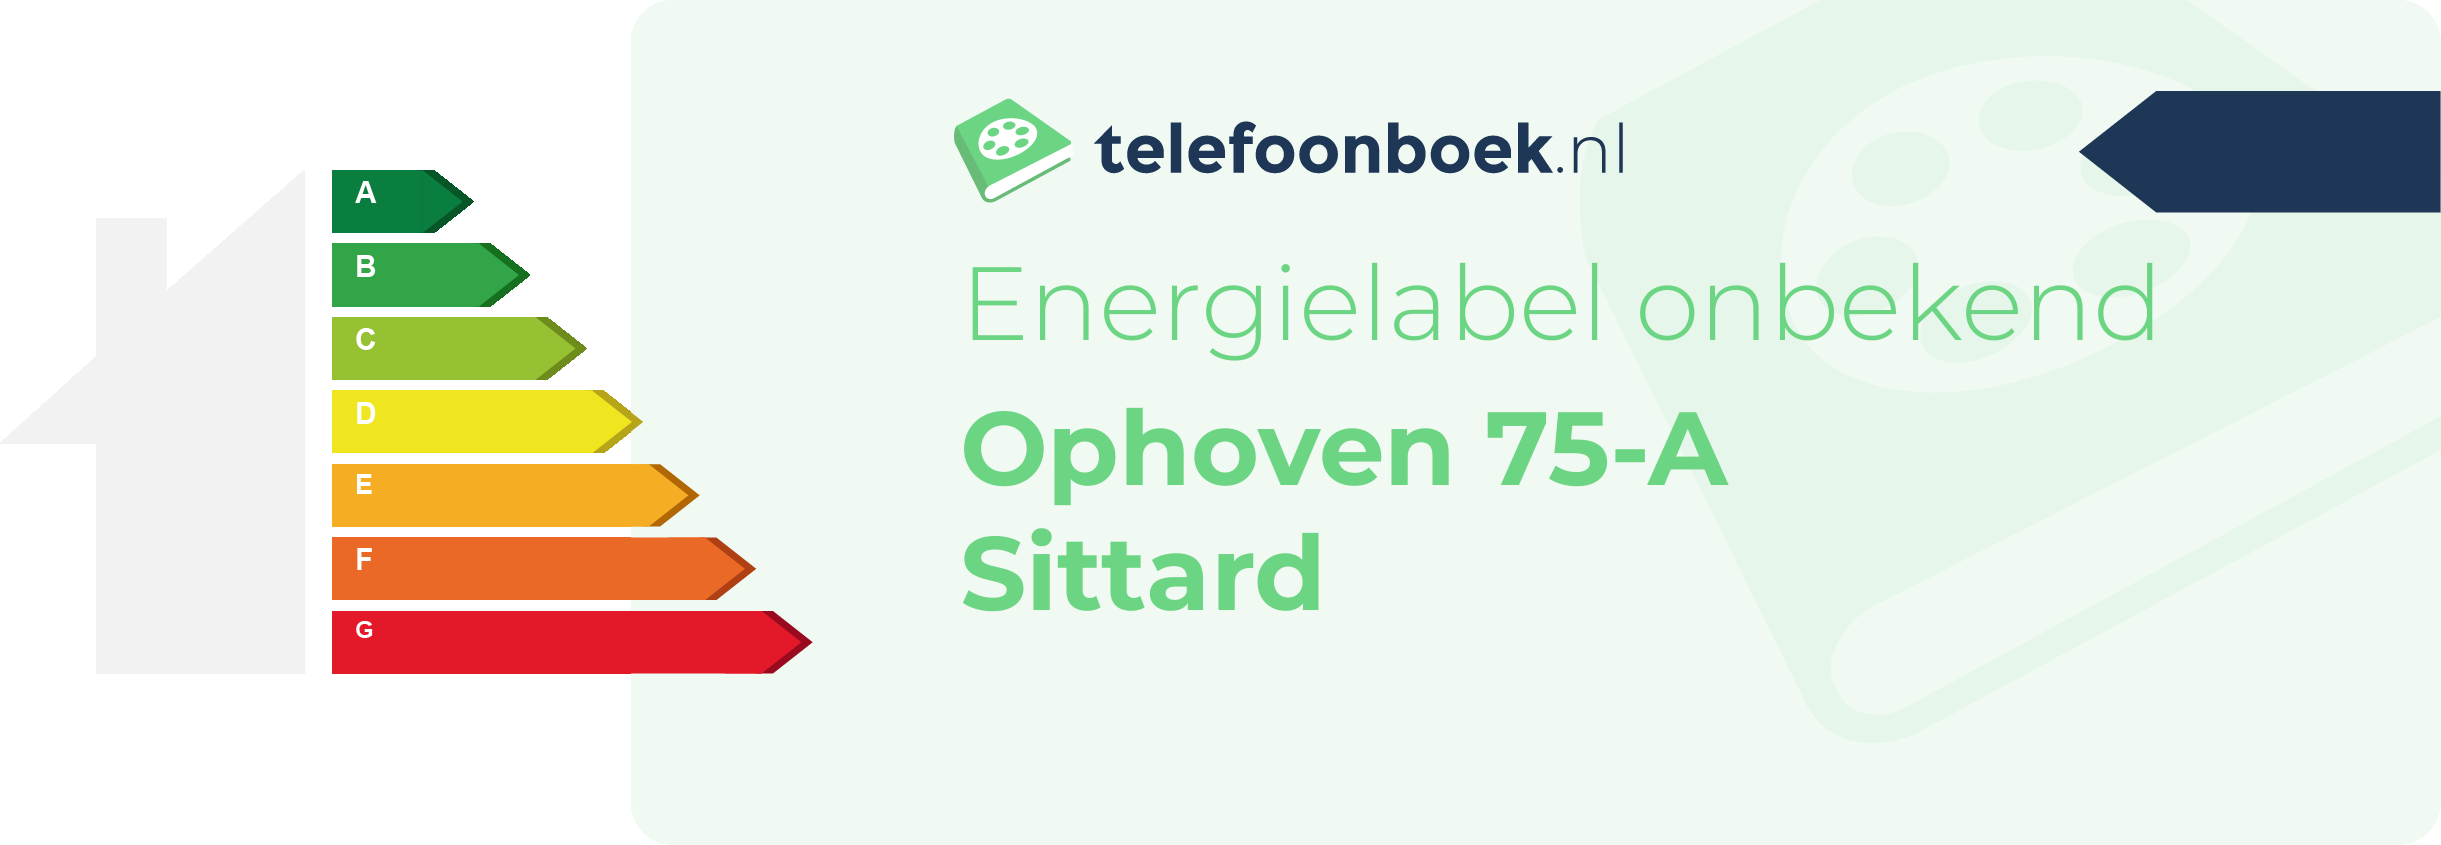 Energielabel Ophoven 75-A Sittard